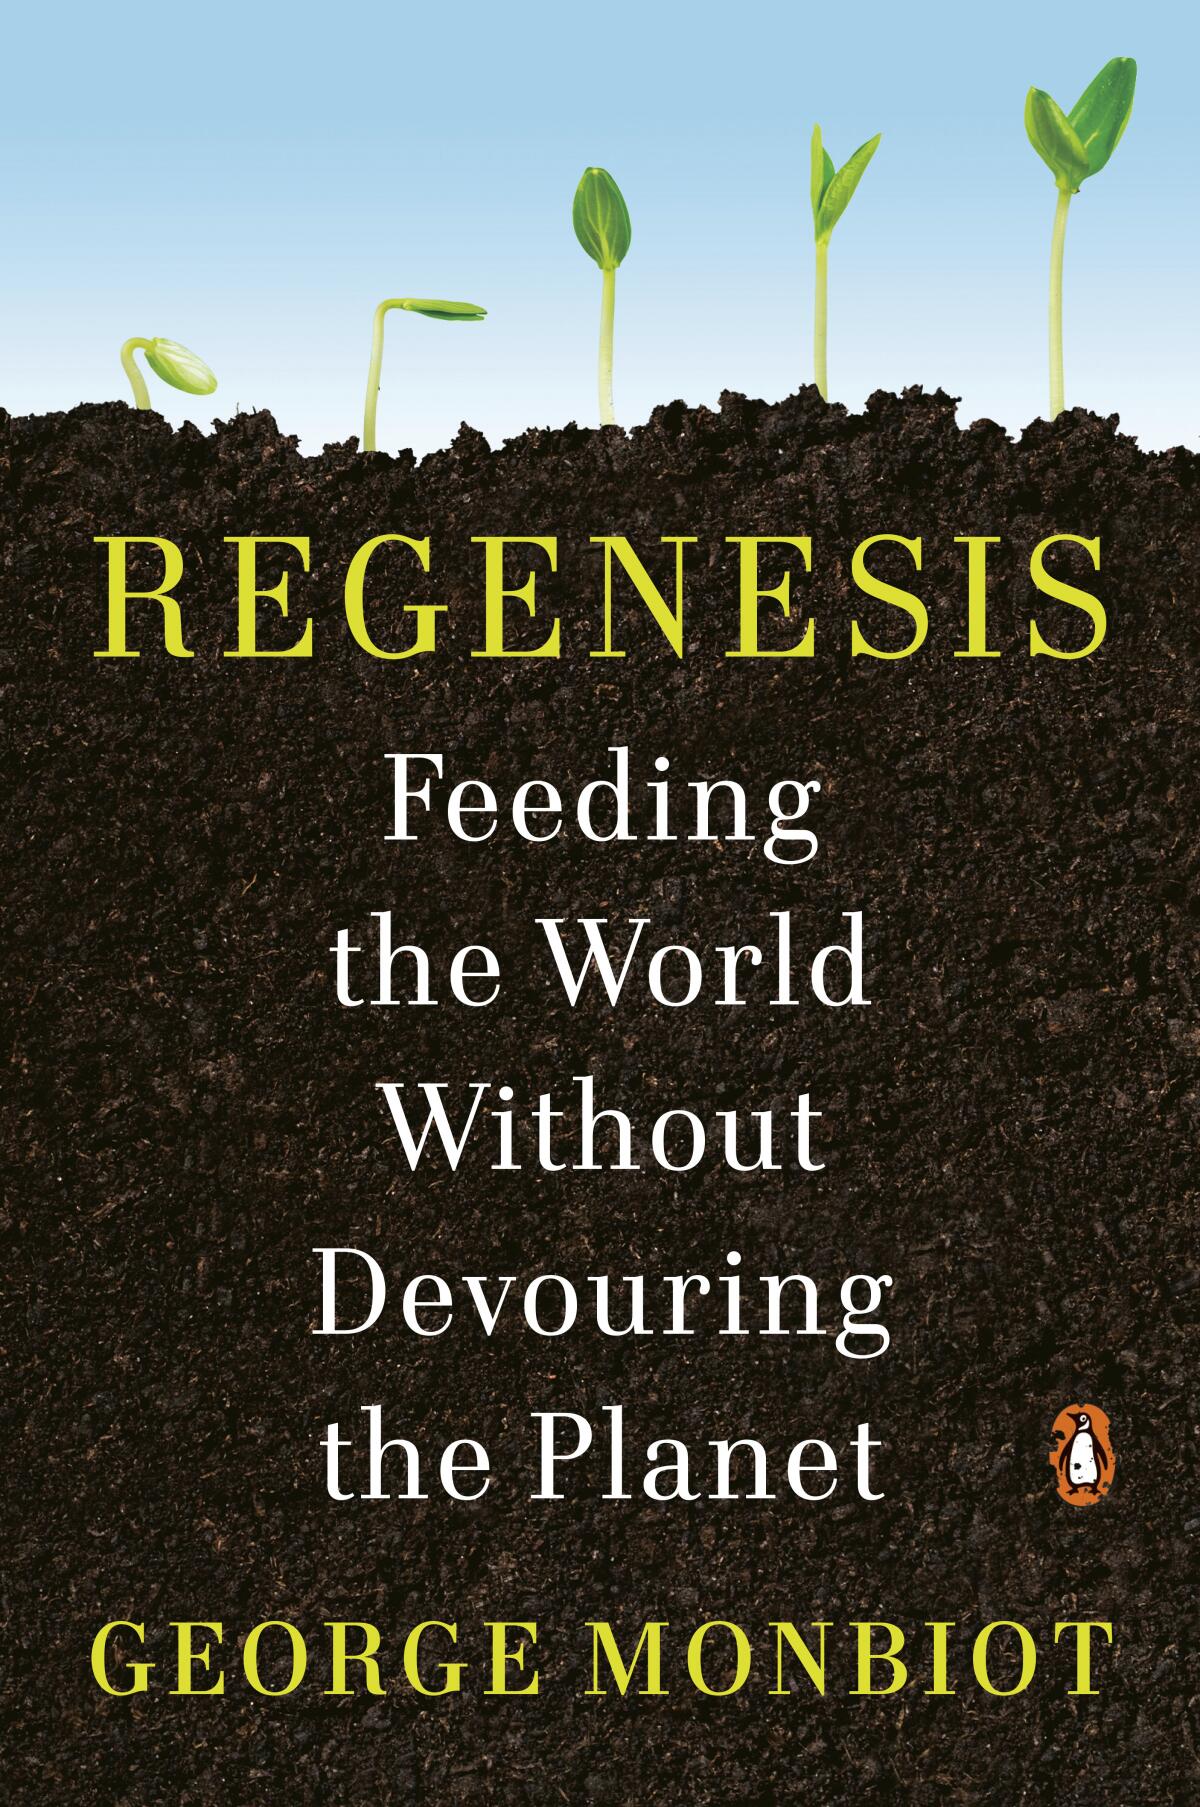 This image released by Penguin Books shows "Regenesis: Feeding the World Without Devouring the Planet" by George Monbiot. (Penguin Books via AP)